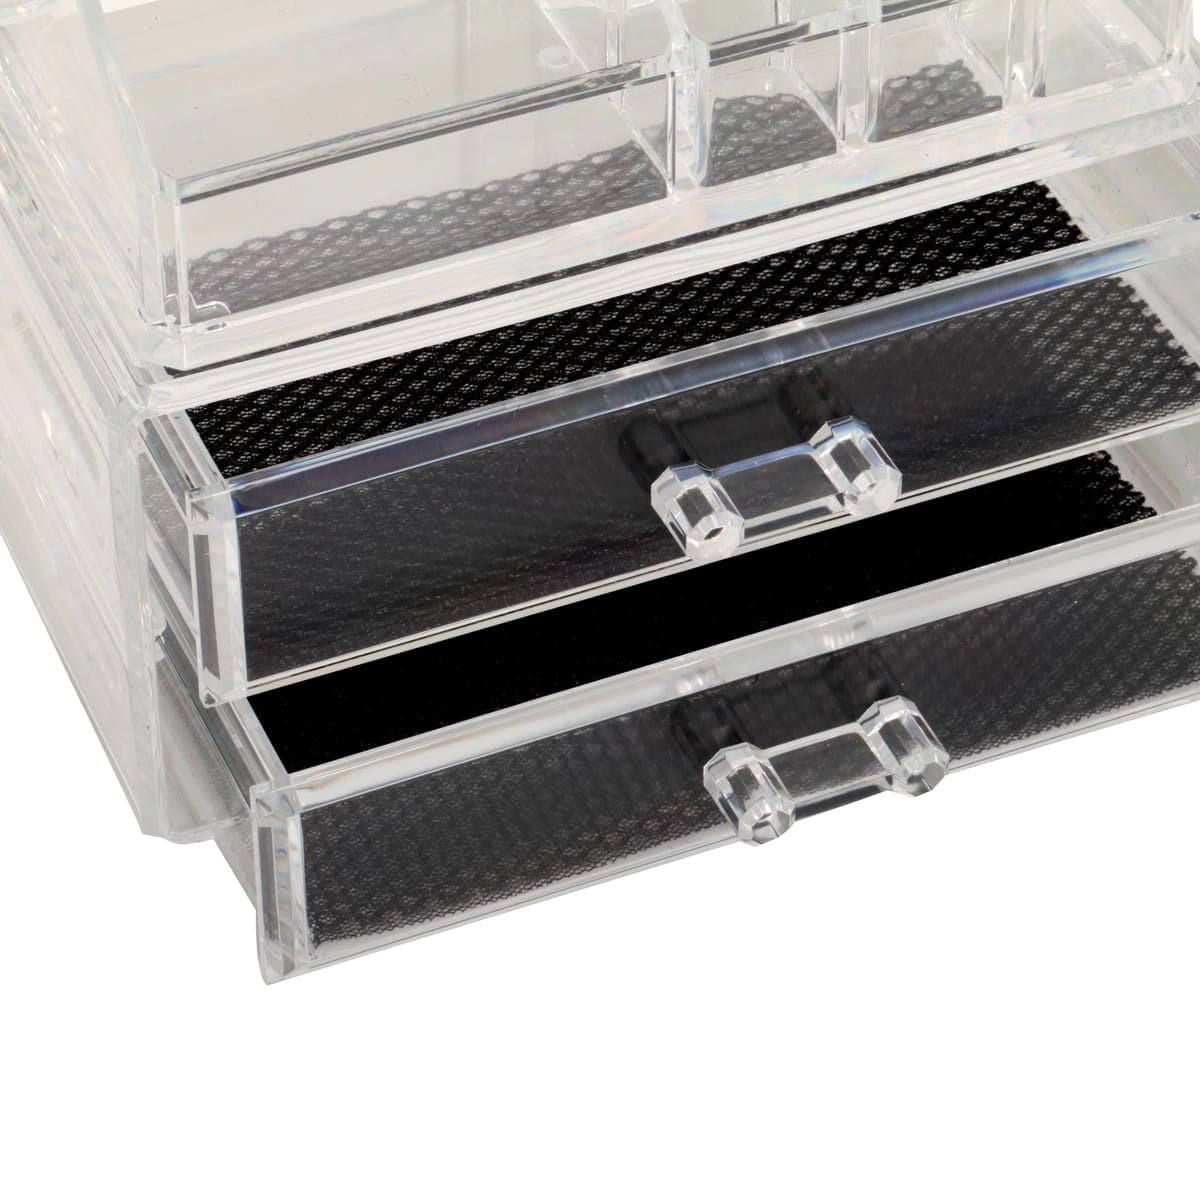 COSMETICS ORGANISER WITH 2 DRAWERS W18.8 D 11.7 H 15.8 CM - best price from Maltashopper.com BR430460579